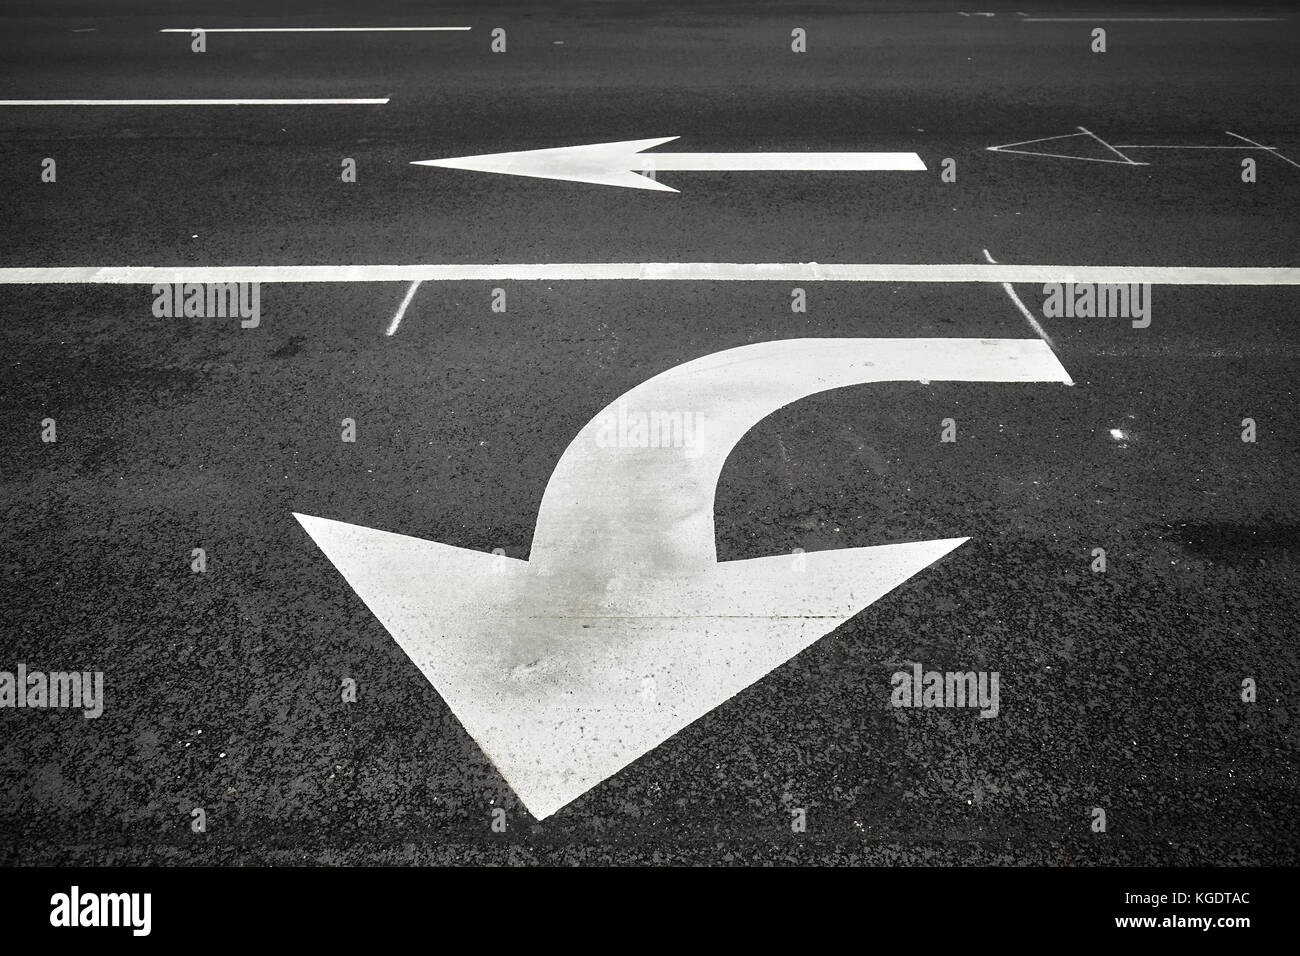 Turn or go straight street signs on asphalt, arrow pointing at viewer, conceptual background with focus on the first arrow. Stock Photo